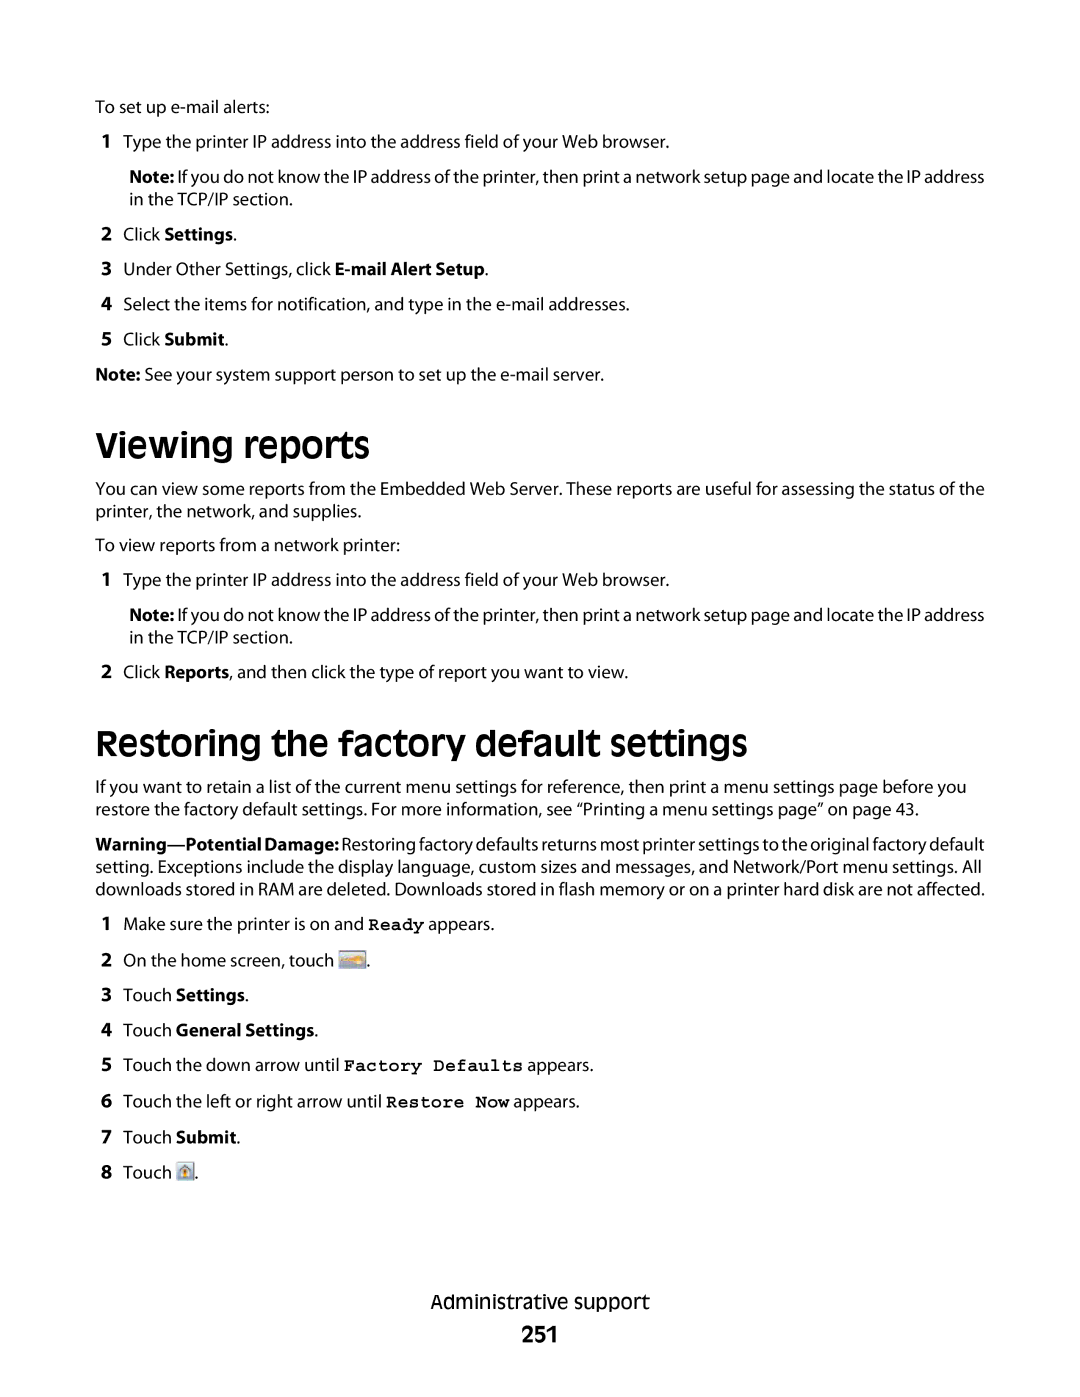 Lexmark MS00855, MS00859, MS00853, MS00850 manual Viewing reports, Restoring the factory default settings, 251 